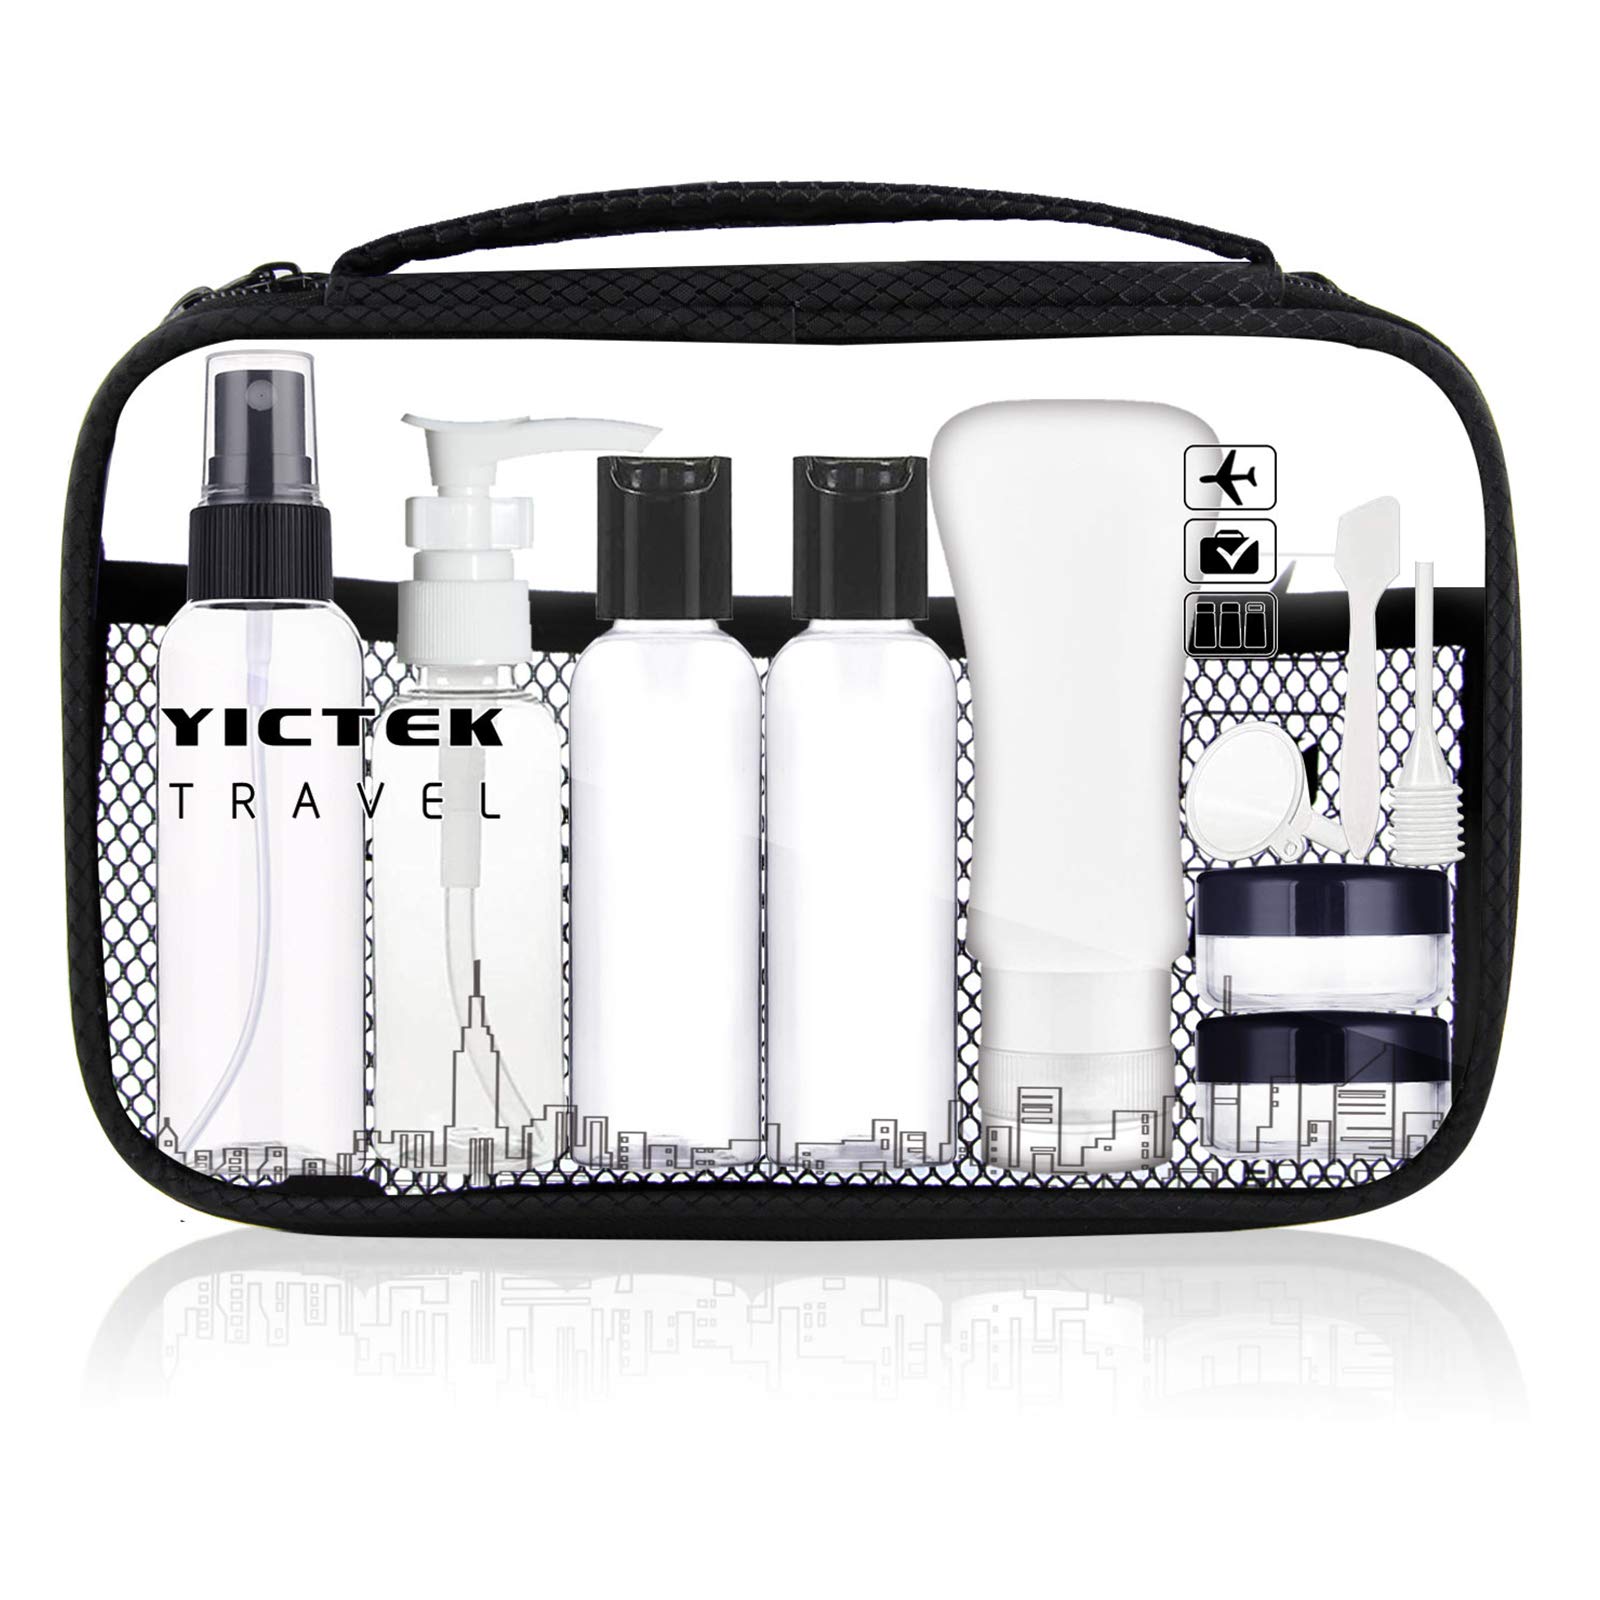 Creo que estoy enfermo manga Ir al circuito Empty Plastic Travel Bottles Containers, TSA Approved Travel Size  Toiletries Tubes Kit for Liquids, Carry-On Set for Women/Men Clear